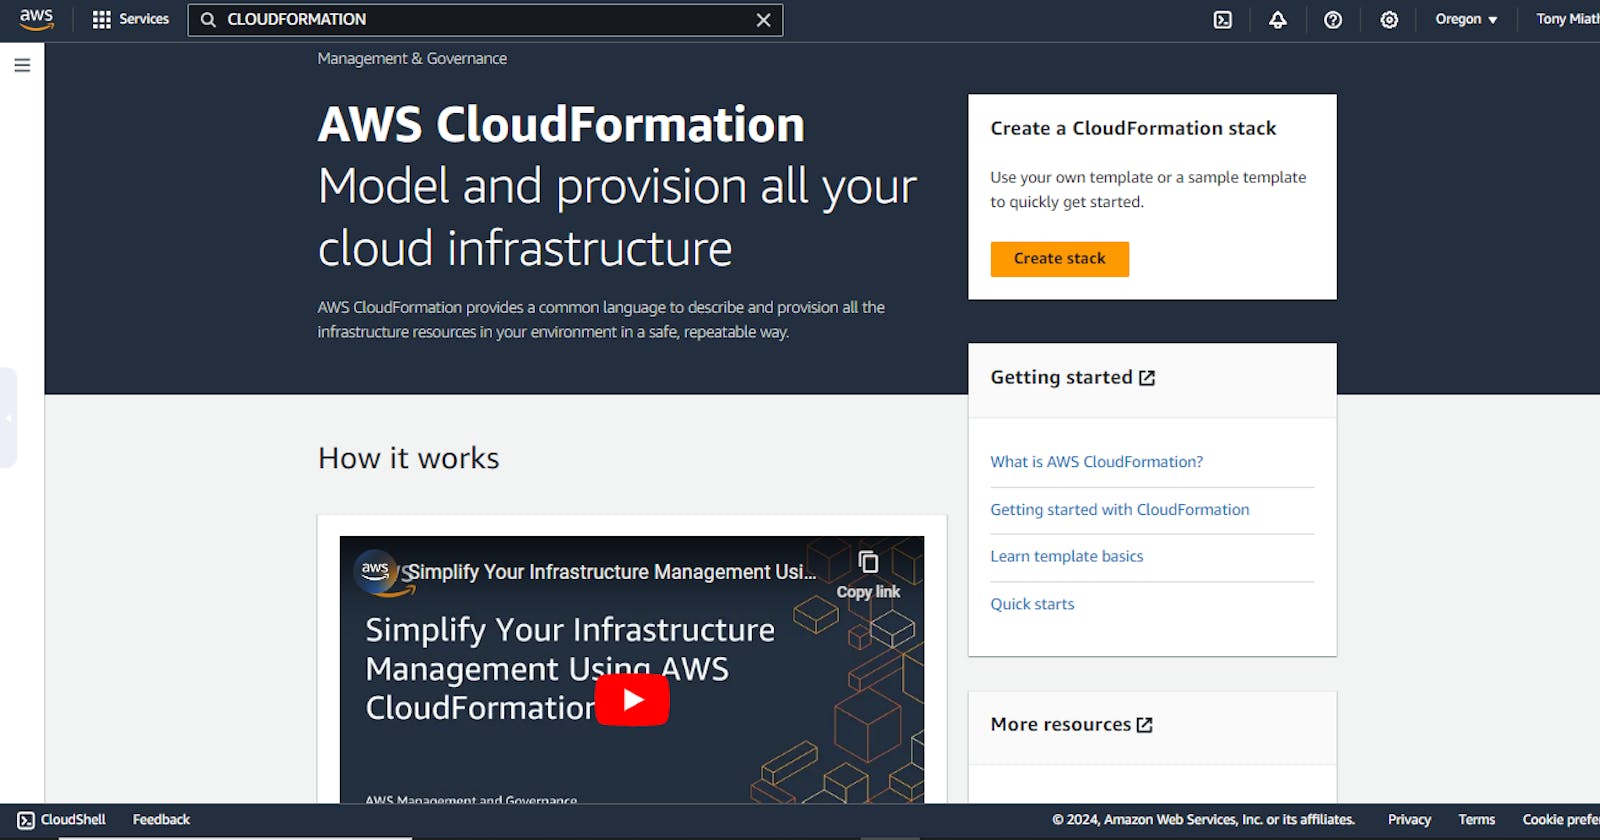 Uploading a Template on AWS CloudFormation